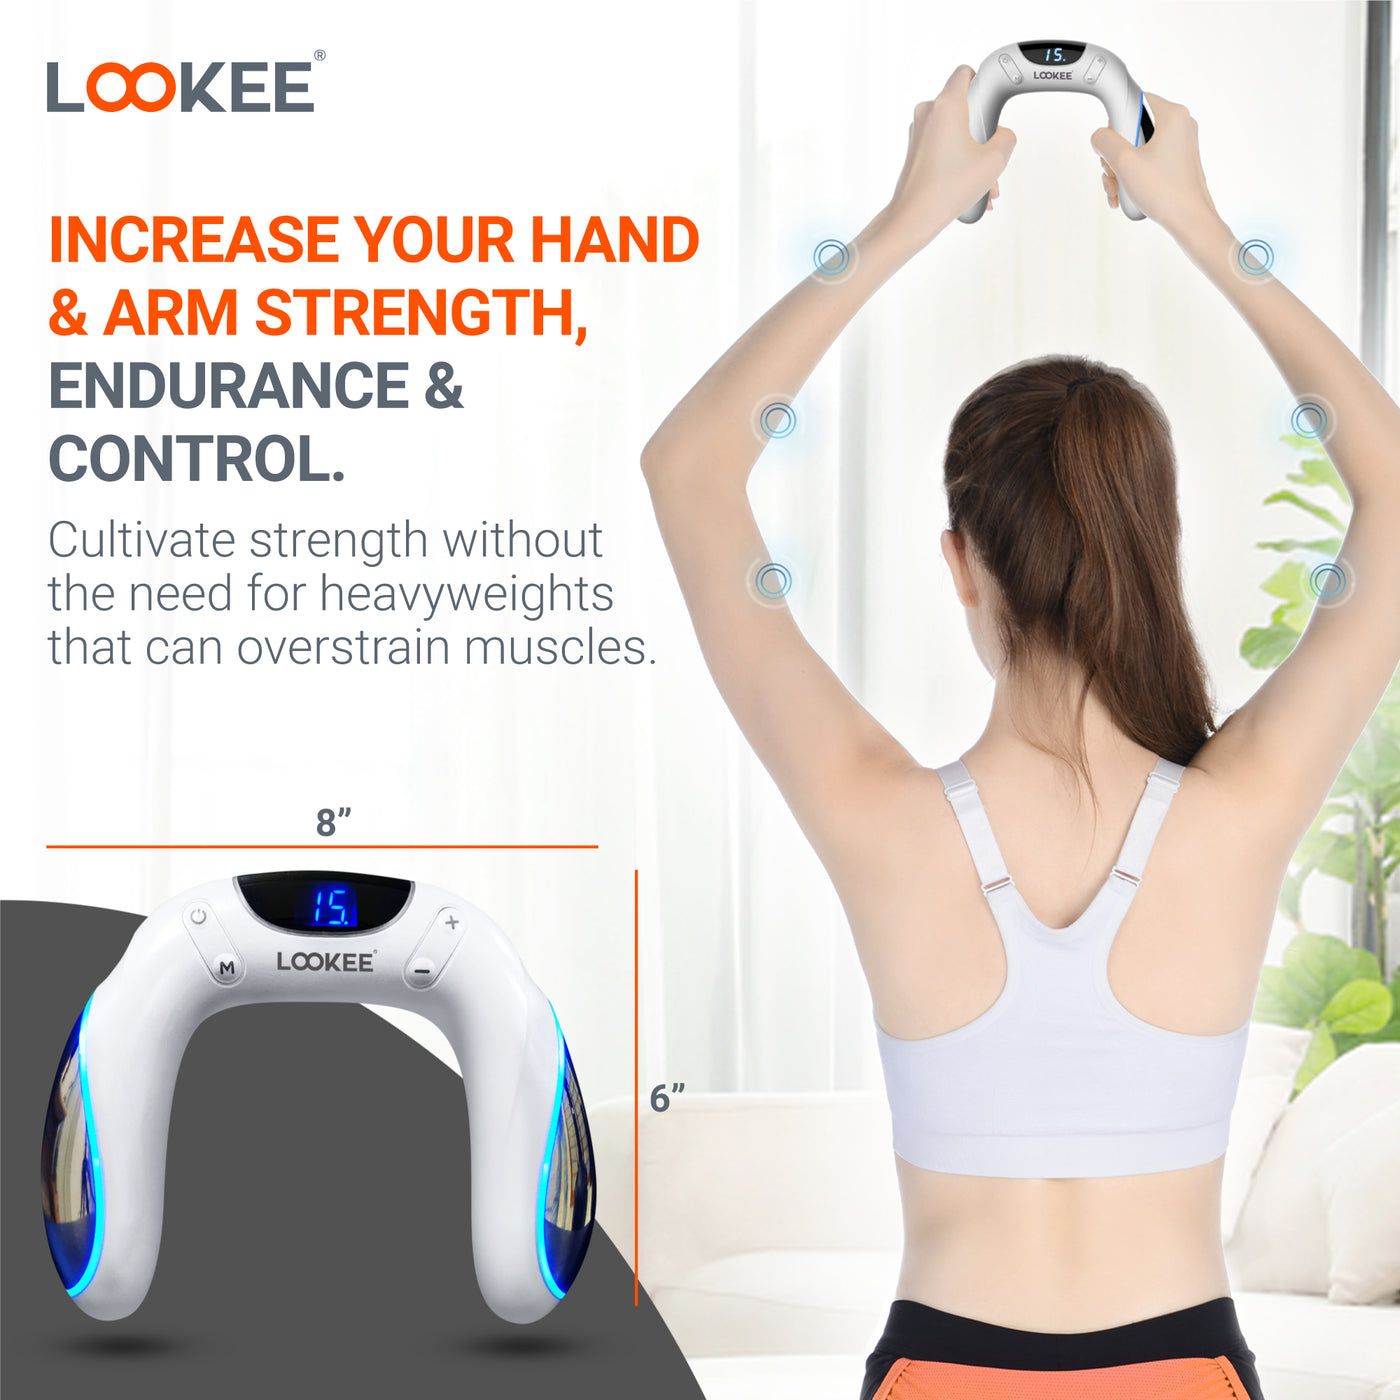 LOOKEE® A8 Arm Workout EMS Exerciser, Electric Muscle Stimulator Trainer Machine for Arms and Hands.